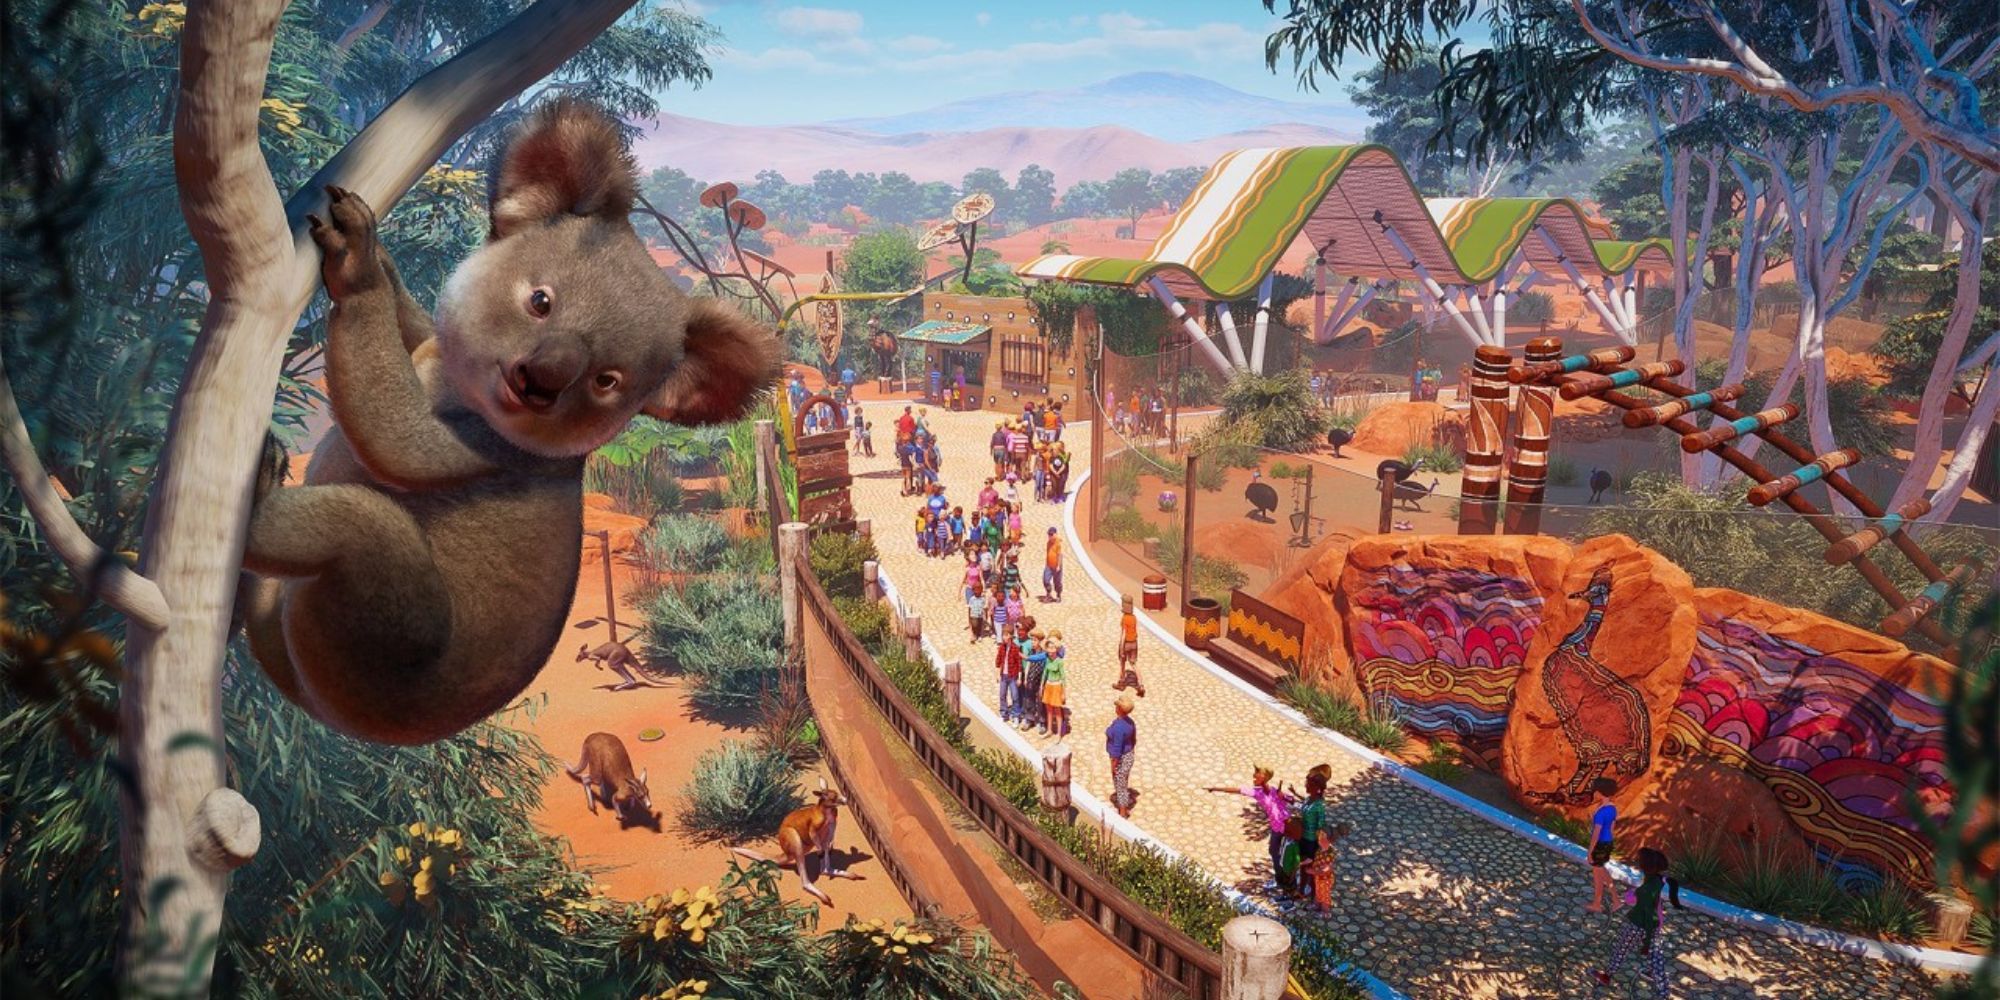 A koala clinging to a tree in front of a zoo in Planet Zoo